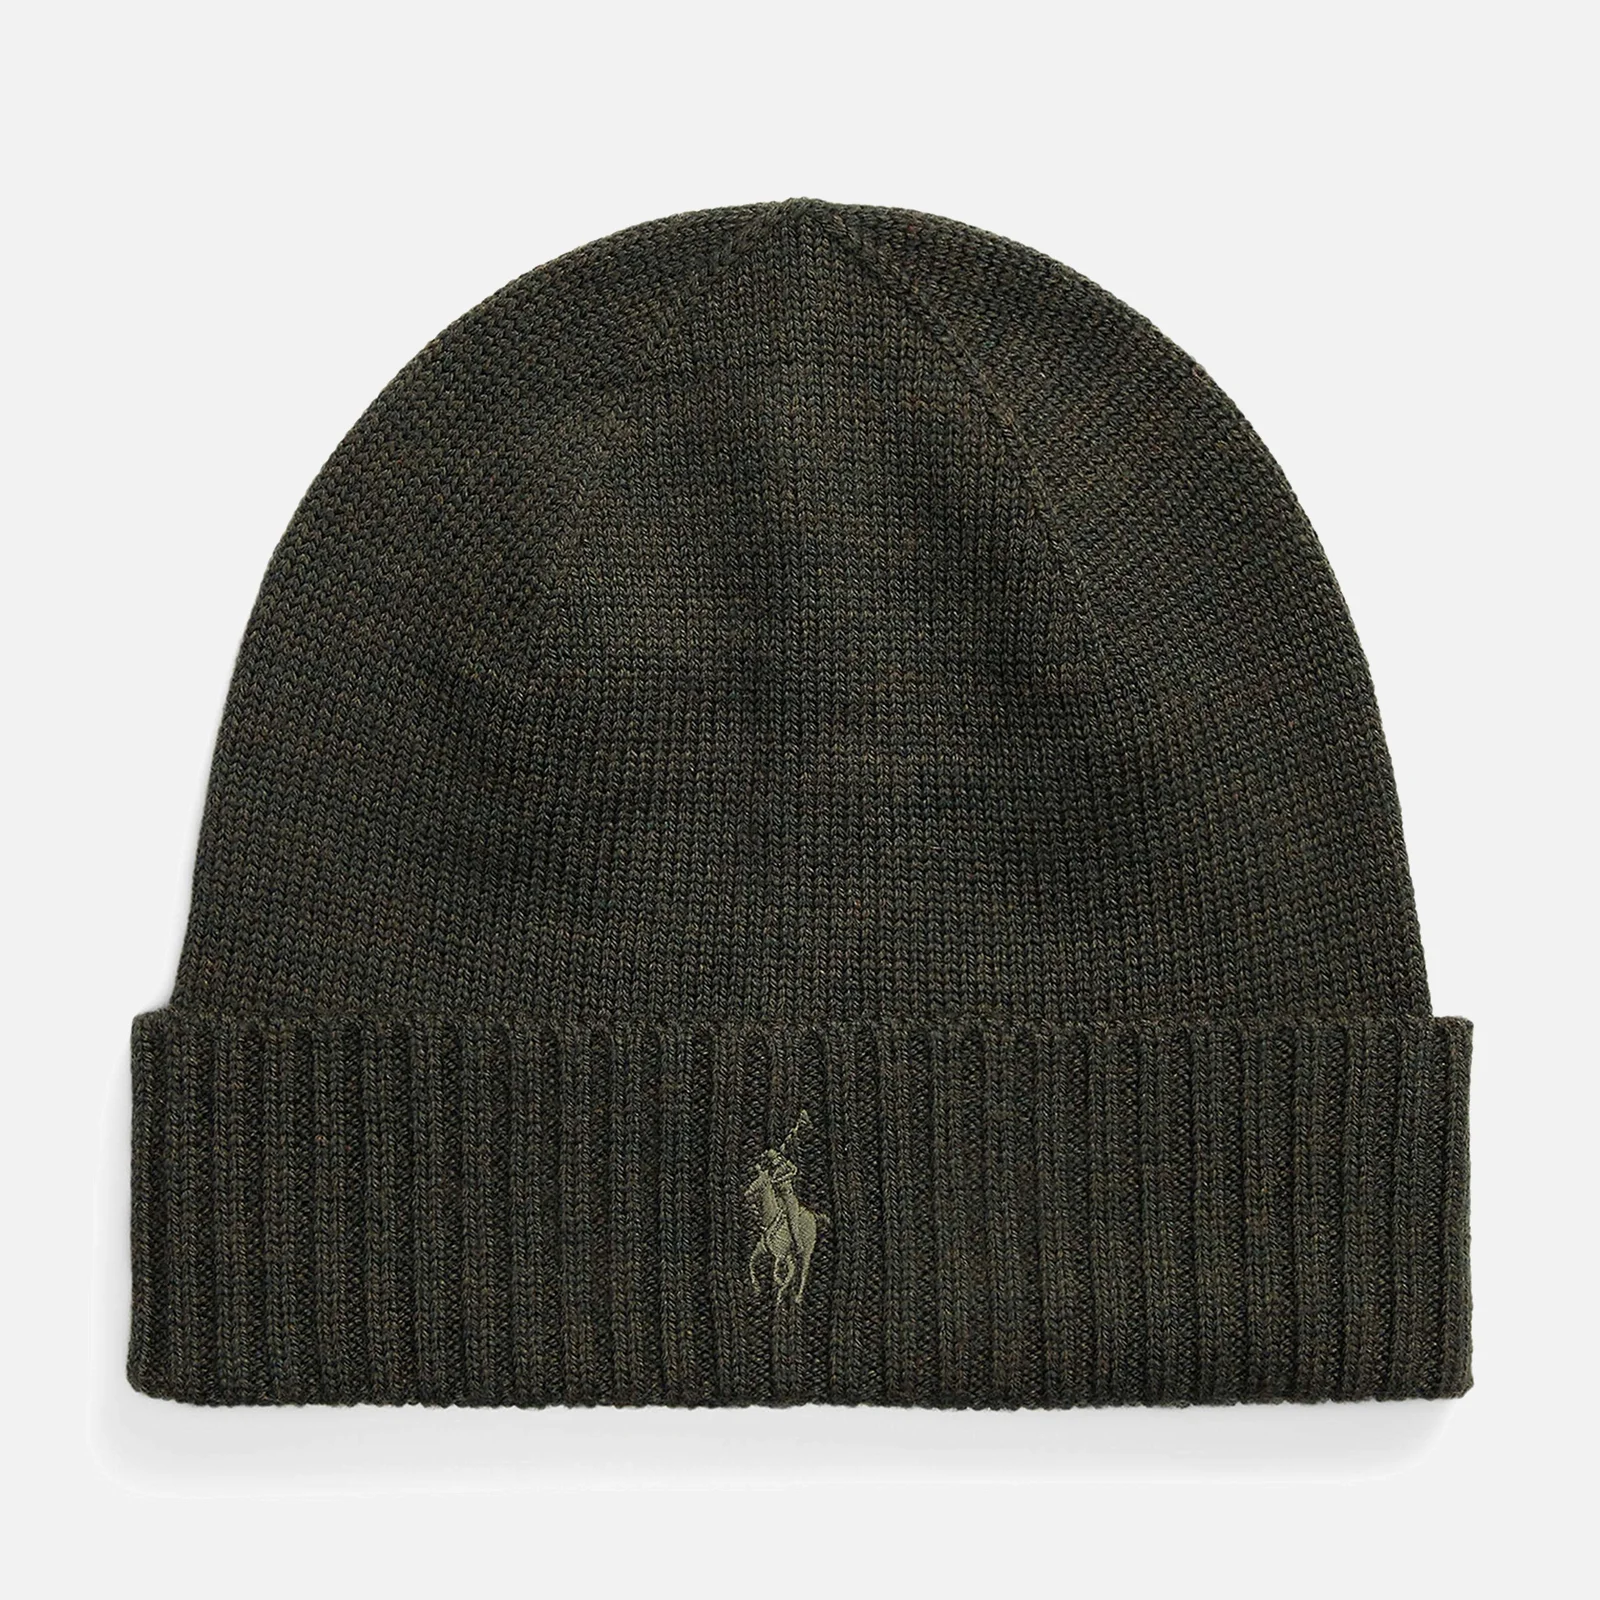 Polo Ralph Lauren Men's Cold Weather Beanie - Olive Heather Image 1